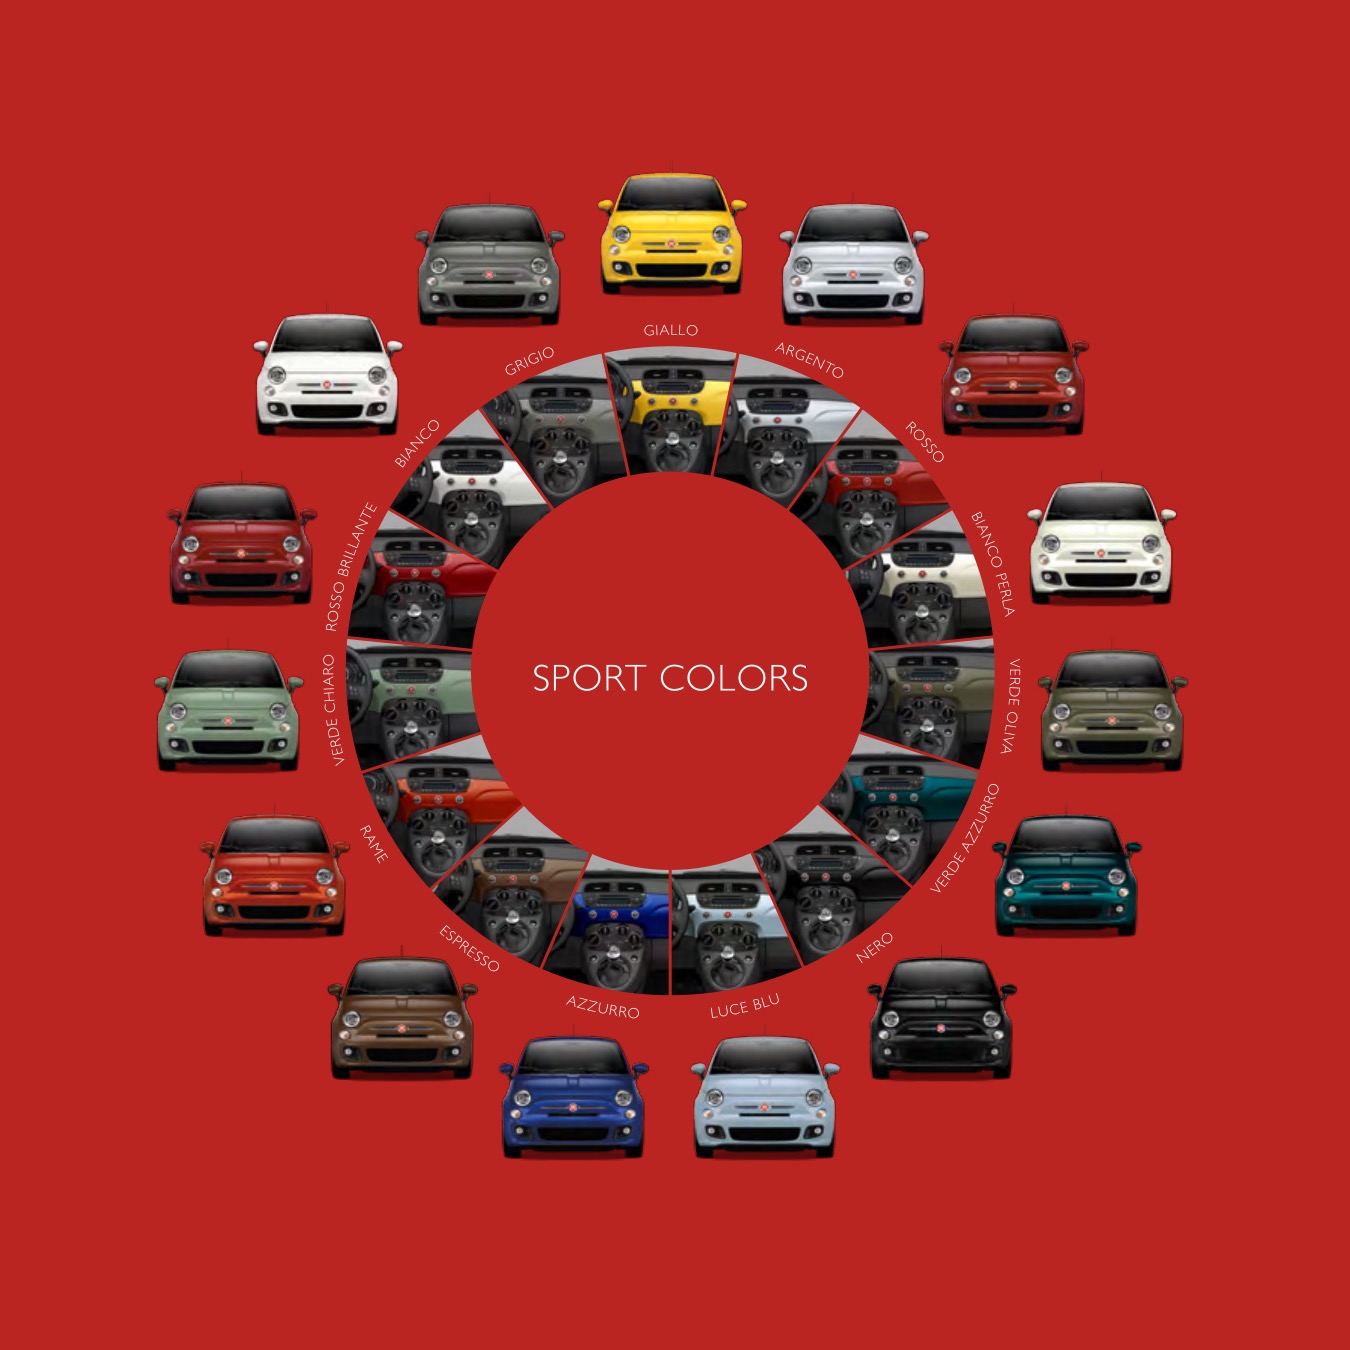 2015 Fiat 500 Brochure Page 18